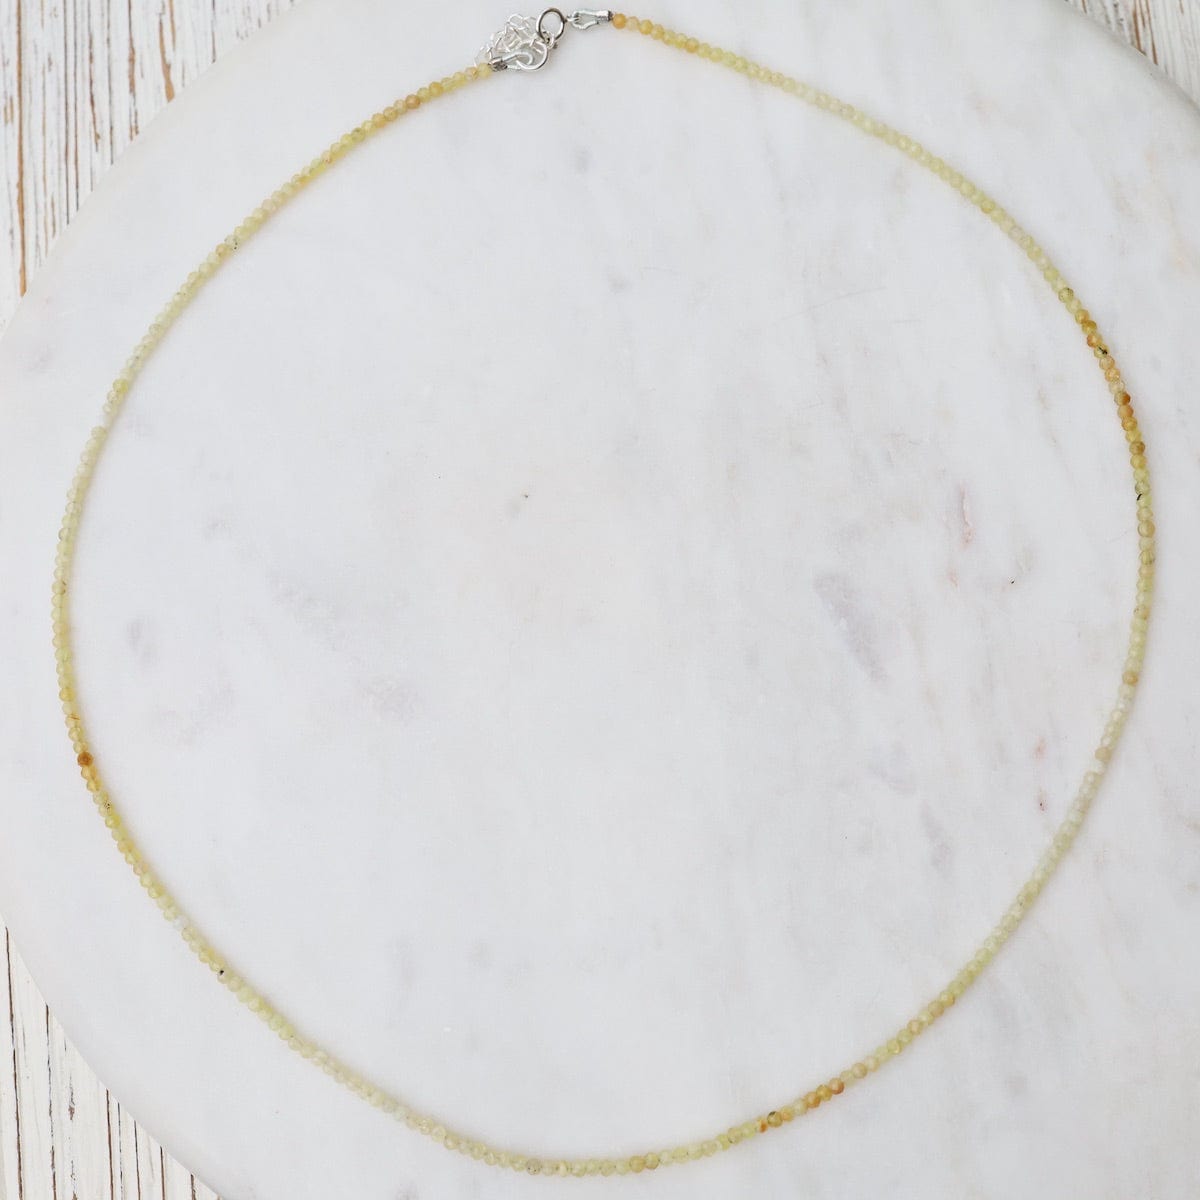 NKL Simple Stone Necklace - Yellow Jade